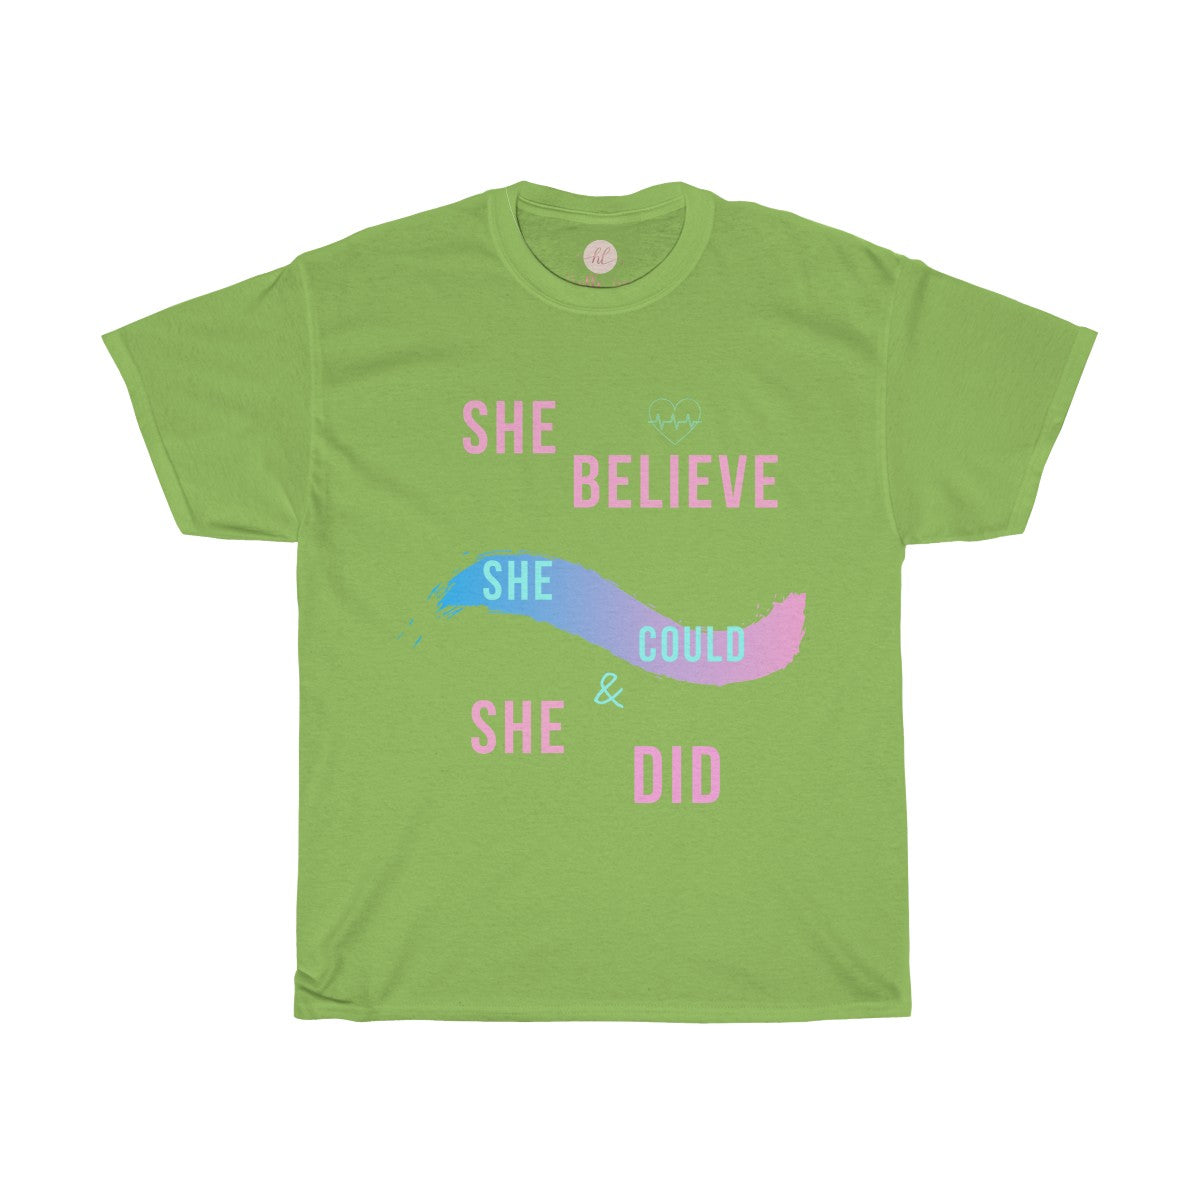 She Believe, She Could So She Did Tee| Believe Tee| Girl Believer T-shirt|